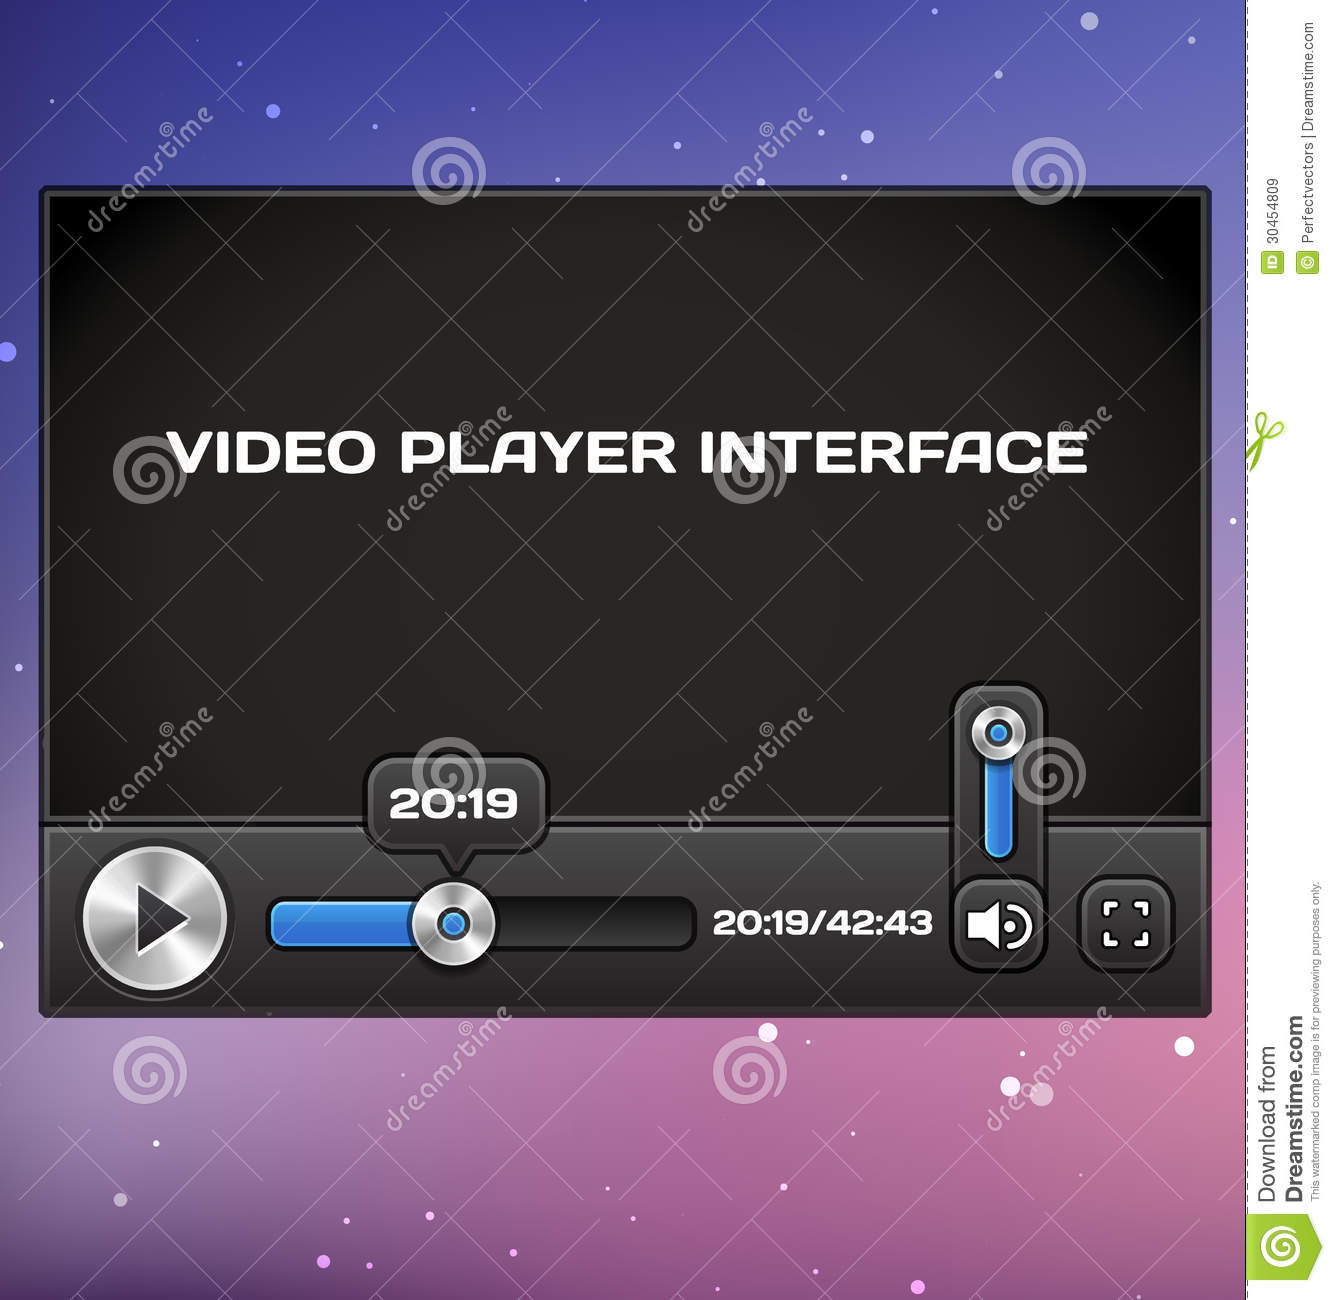 How to download video player for mobile home